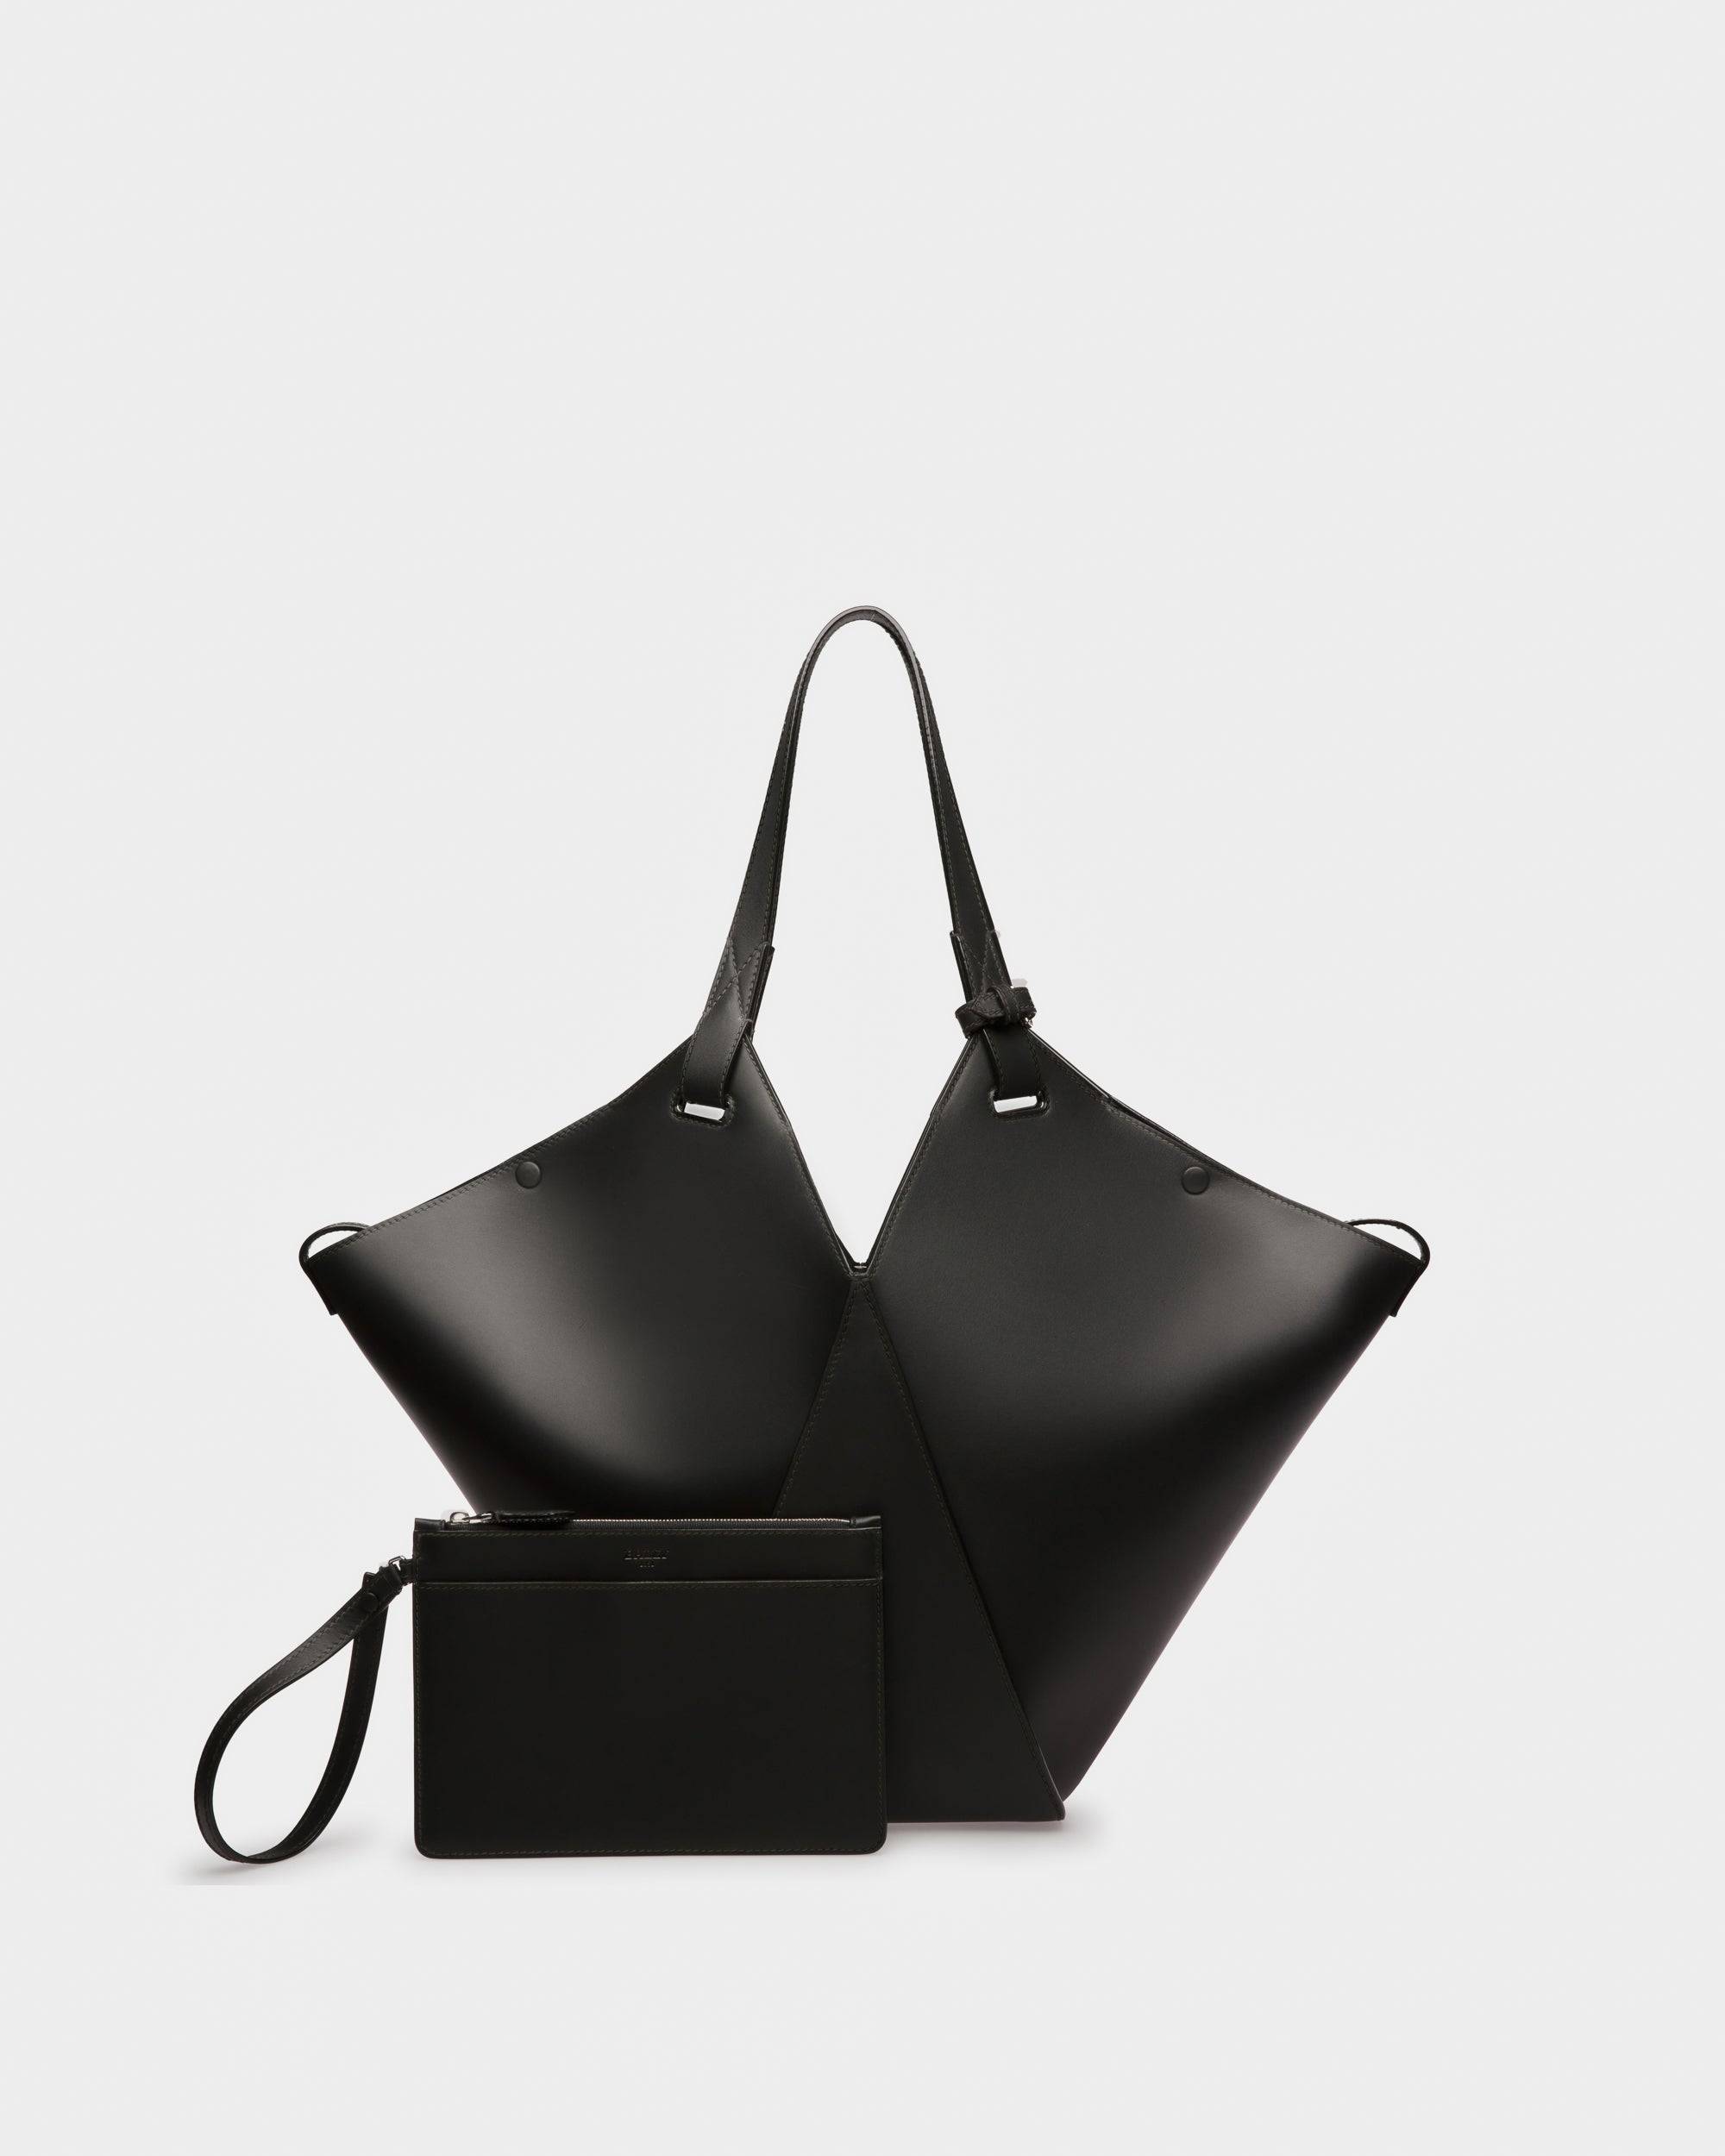 Ahria Tote Bag In Pelle Nera - Bally - 05